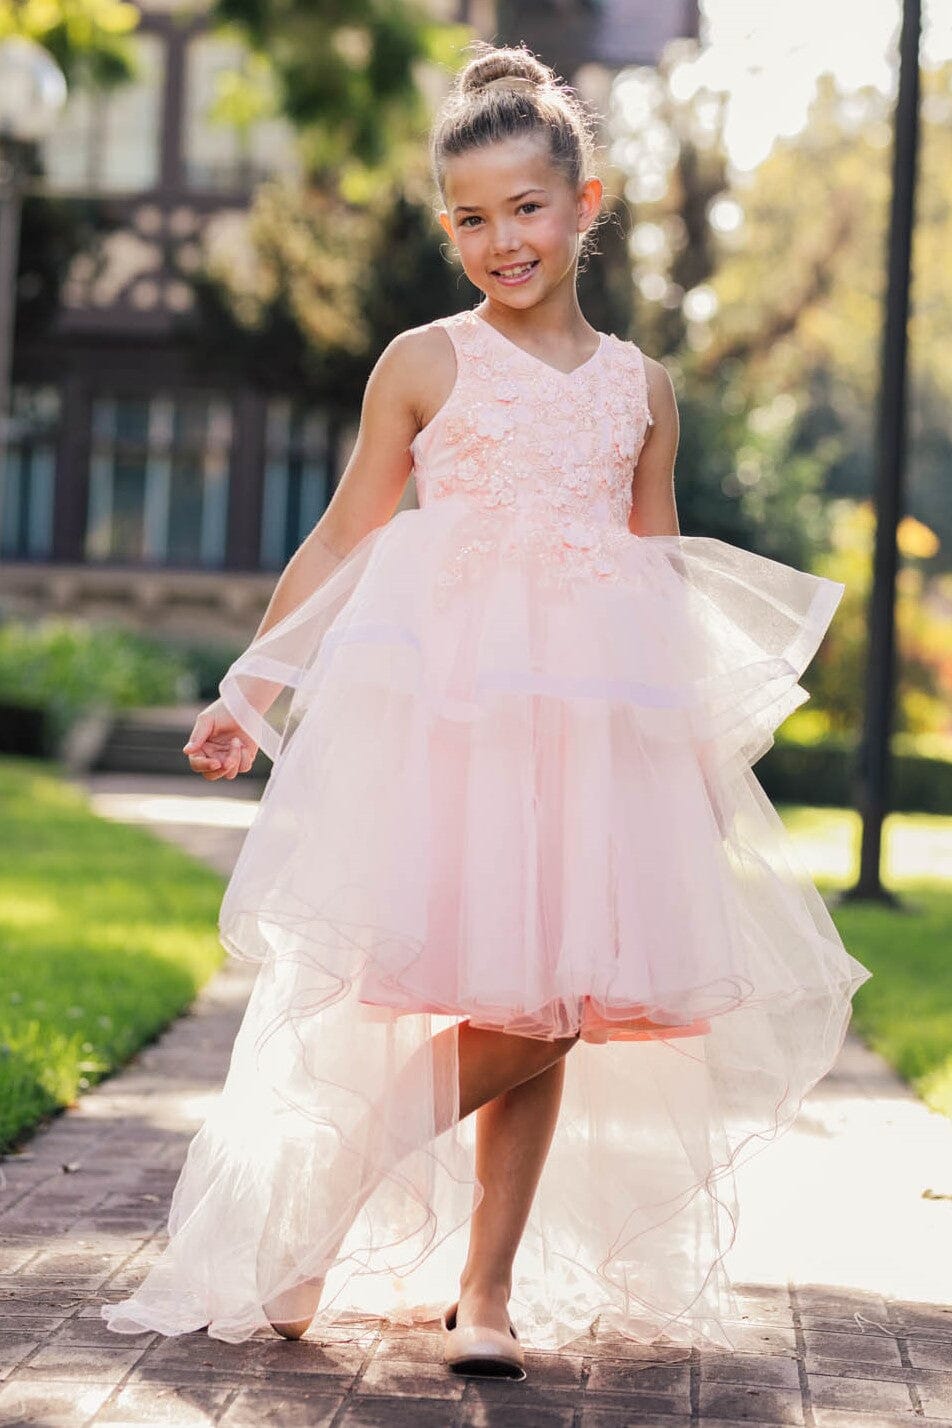 Girls High Low Dress with Appliques by Cinderella Couture 9056